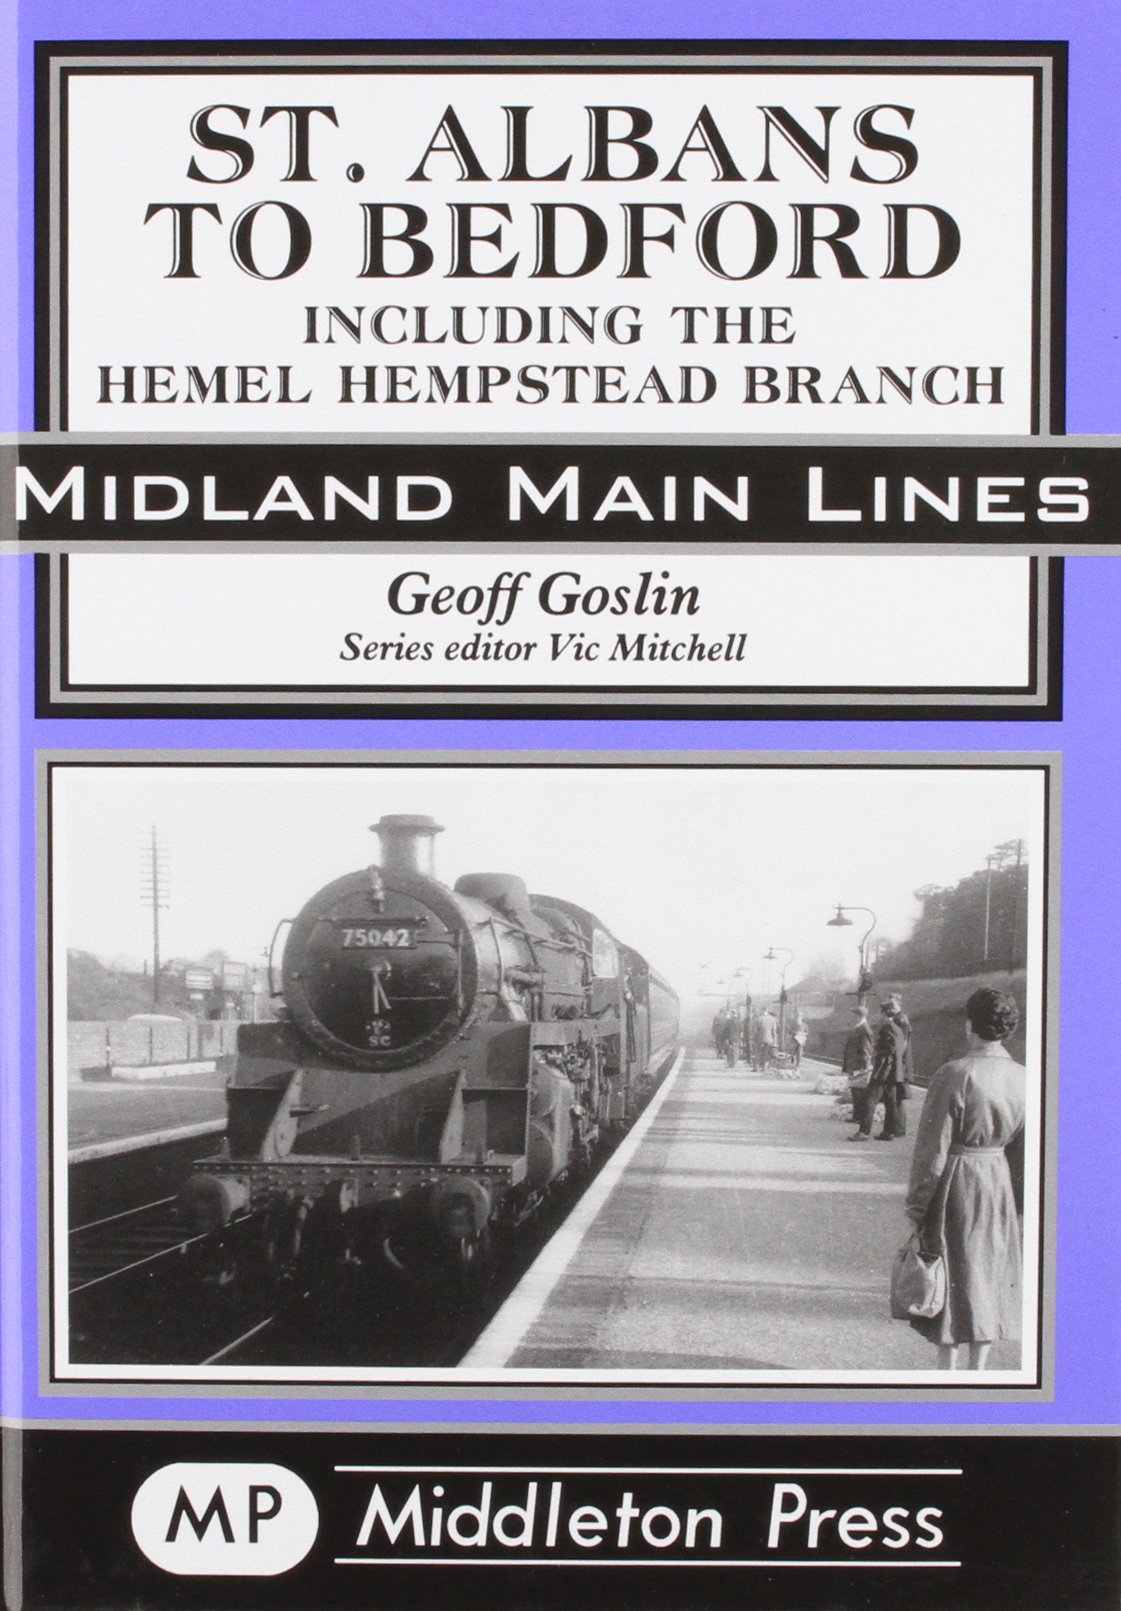 Midland Main Lines St. Albans to Bedford including the Hemel Hempstead Branch OUT OF PRINT TO BE REPRINTED